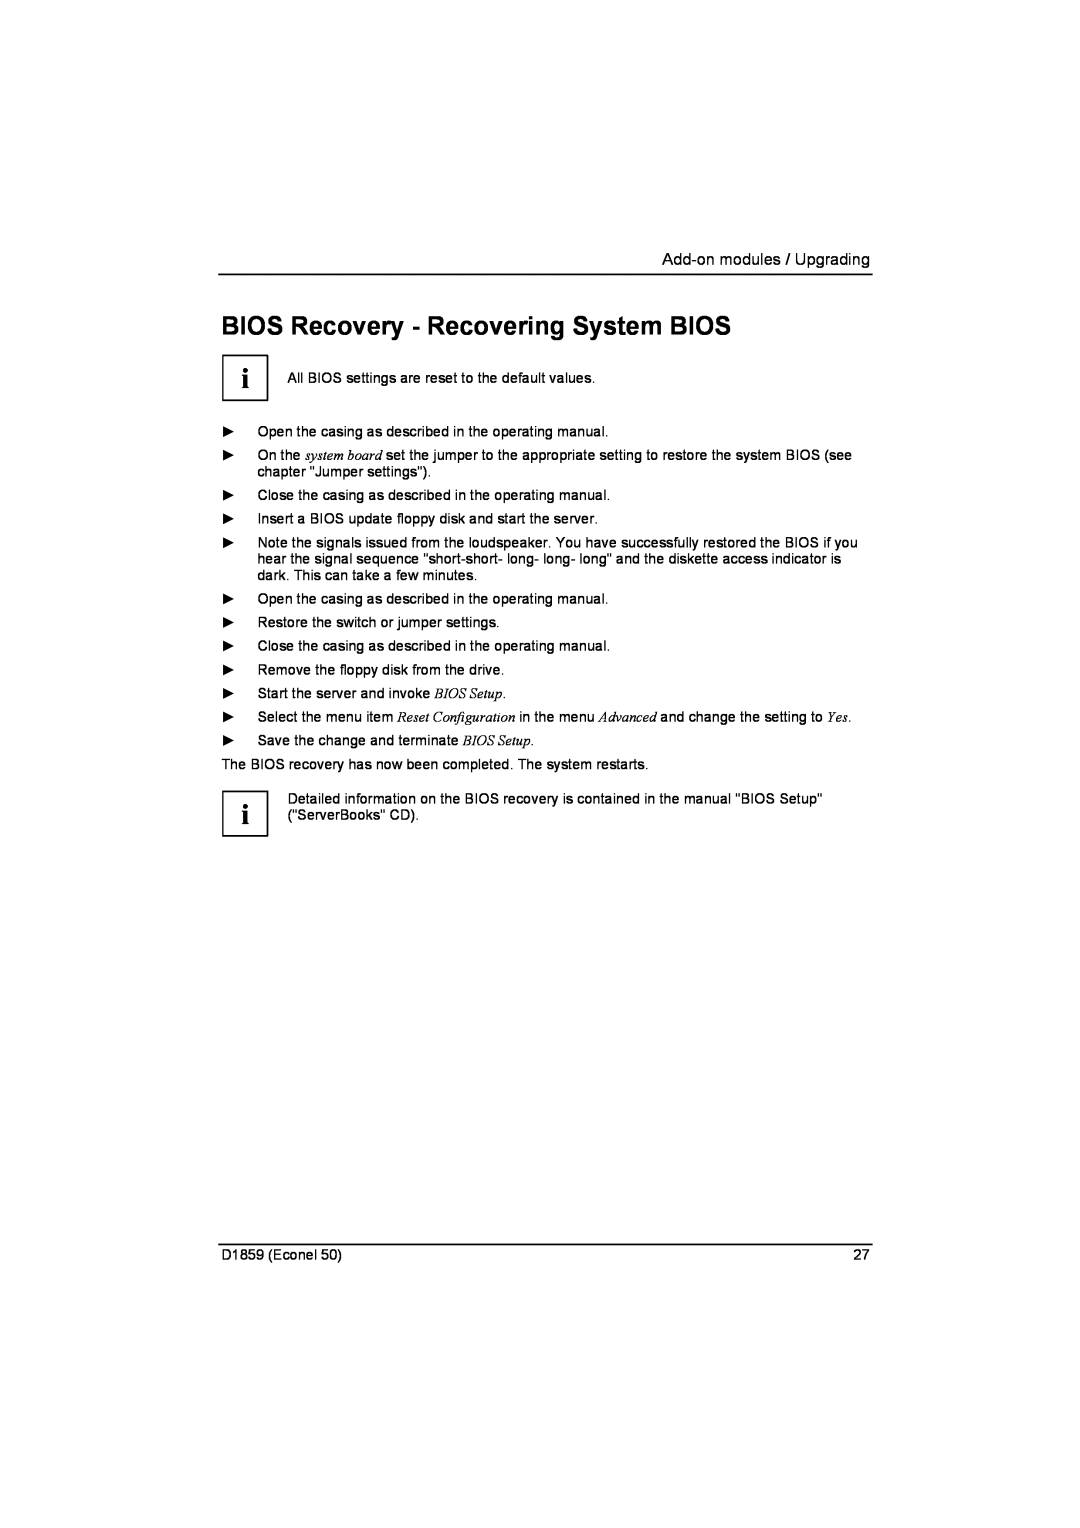 Fujitsu D1859 technical manual BIOS Recovery - Recovering System BIOS, Add-on modules / Upgrading 